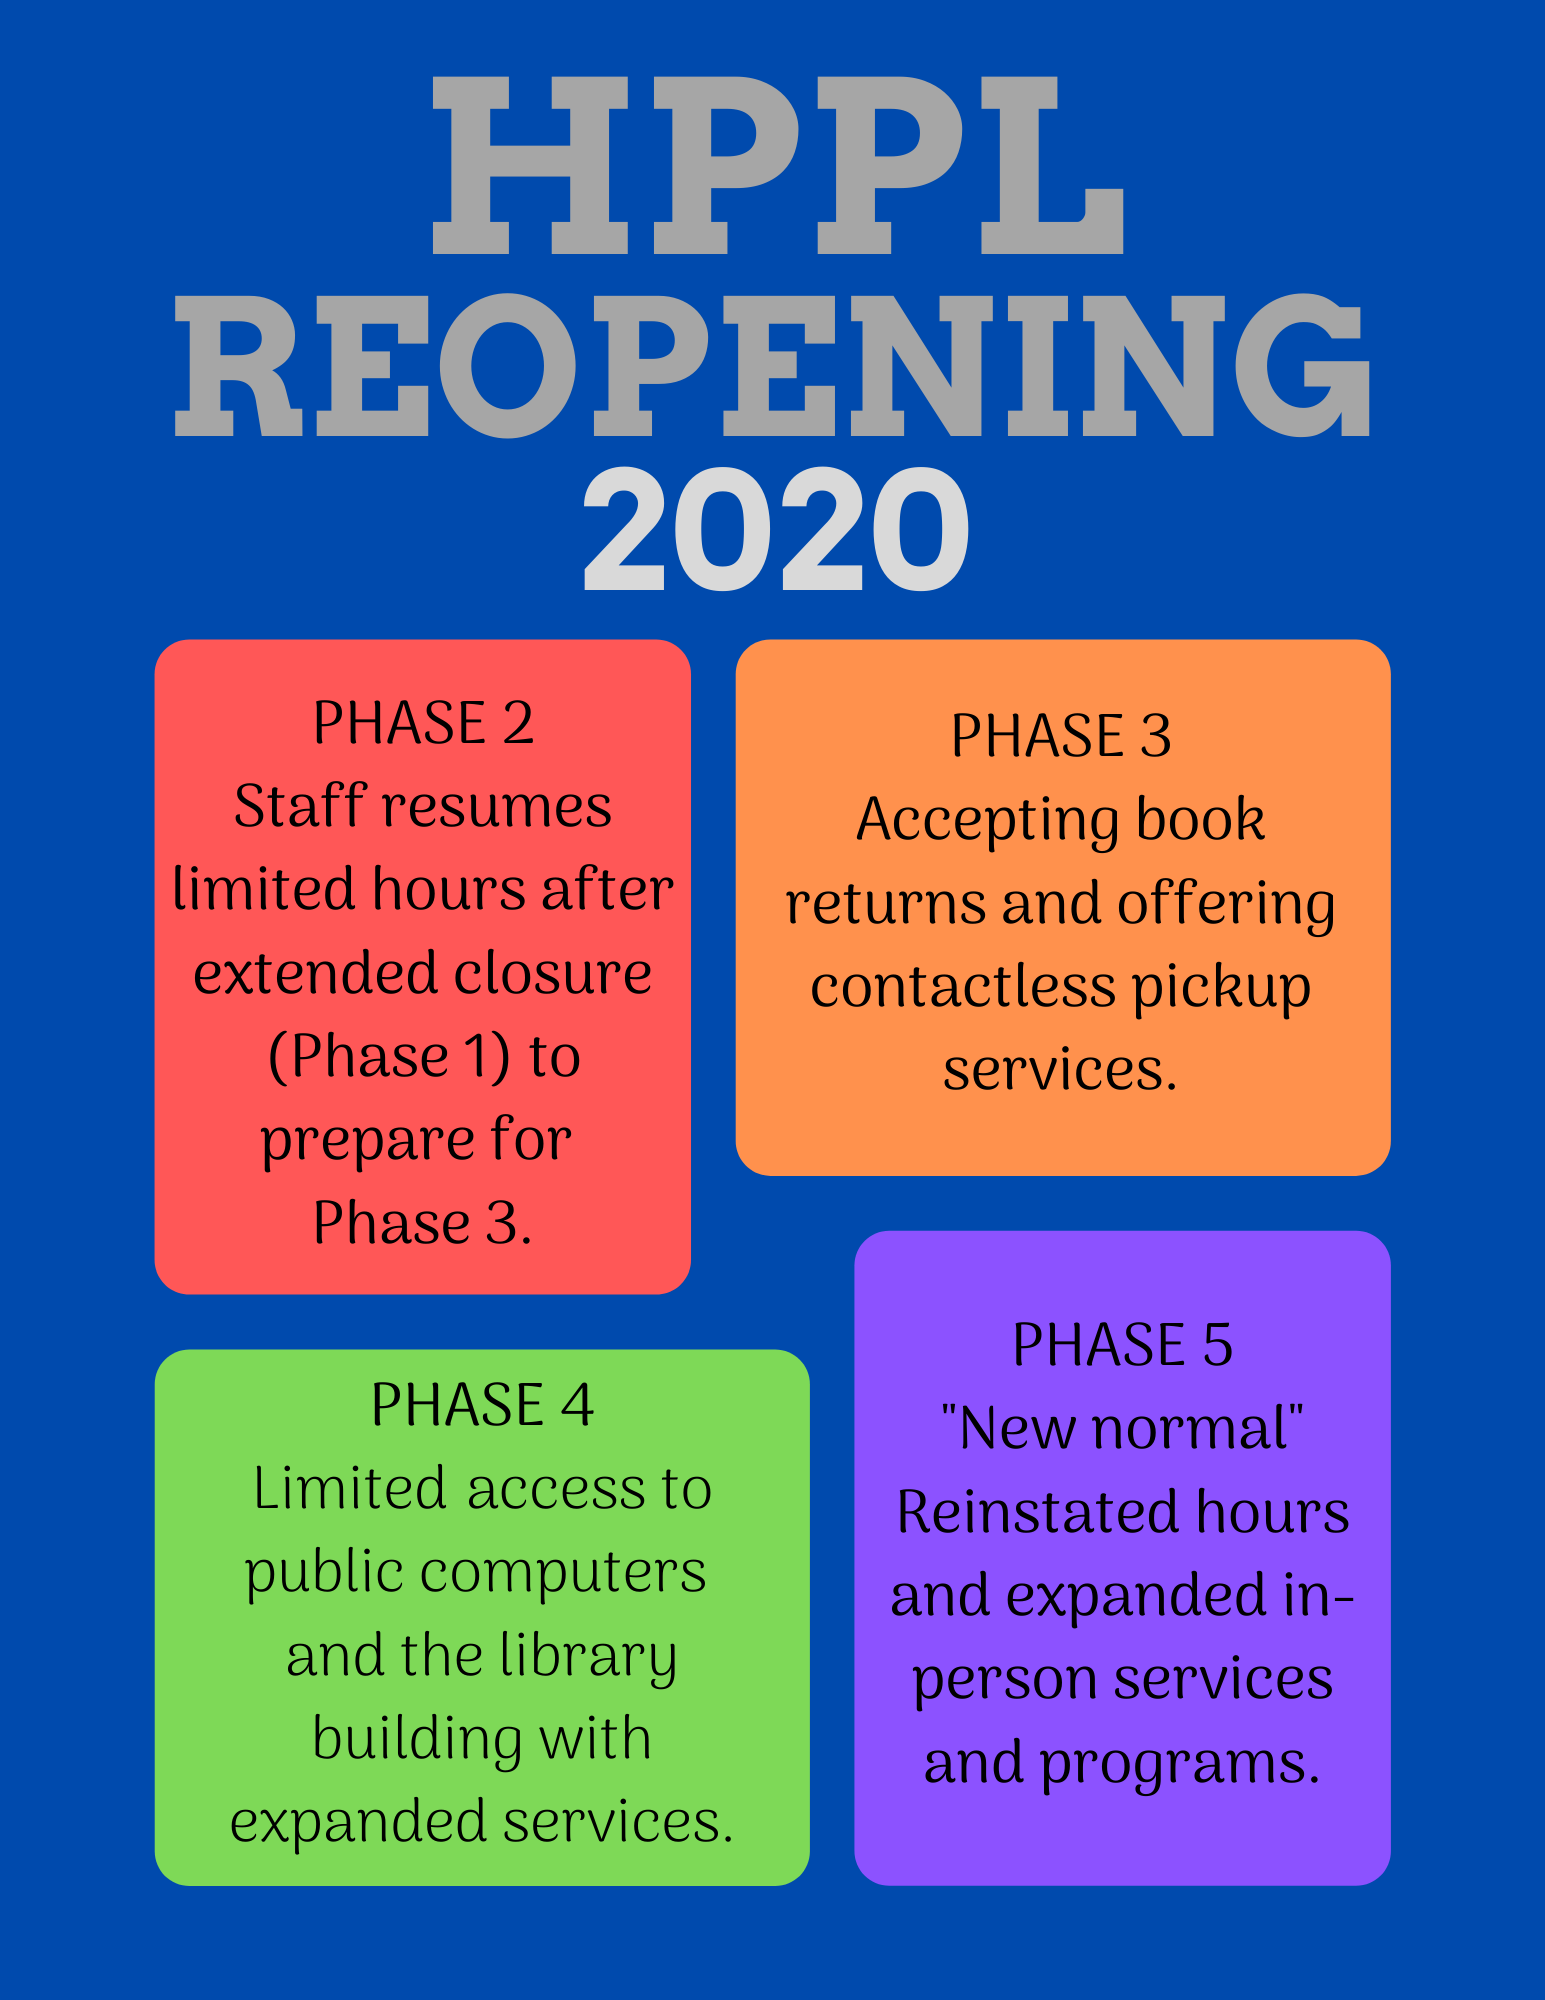 Image summarizing the phased reopening plan for the library.